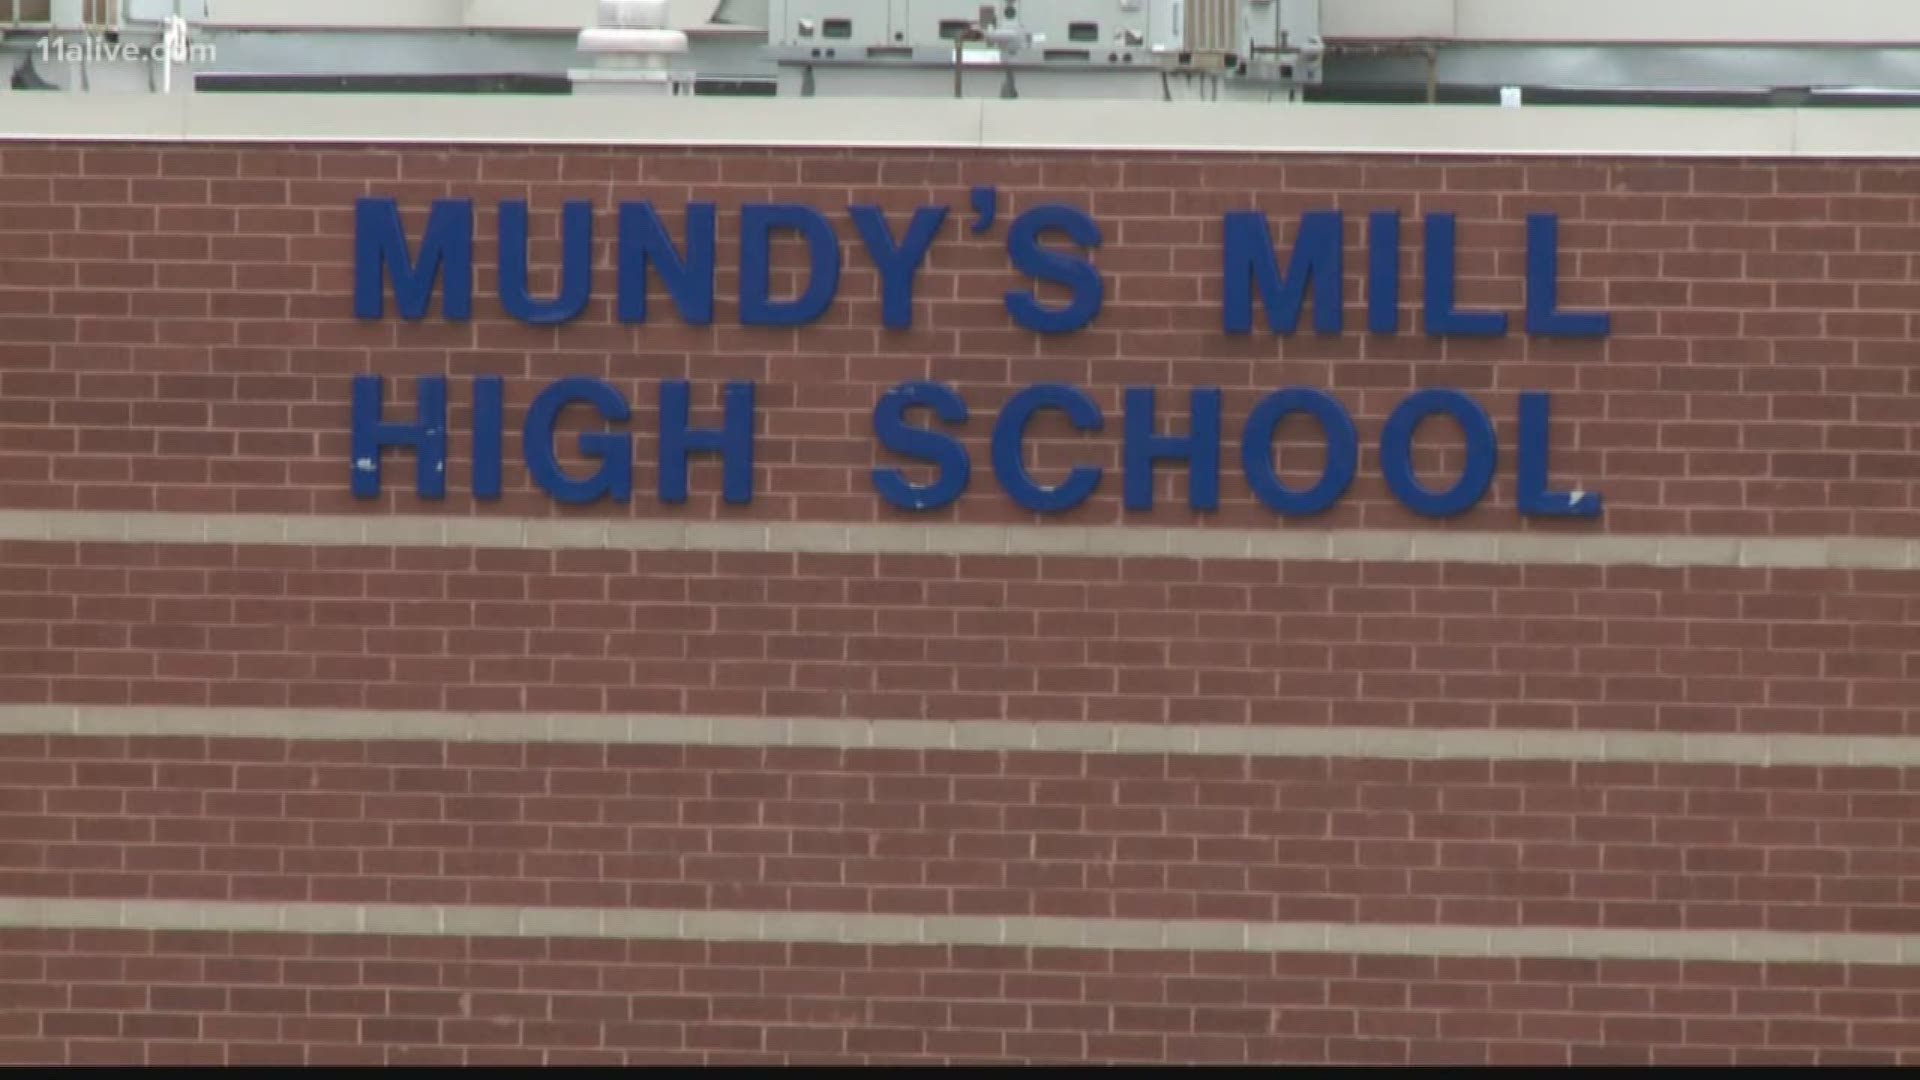 The incident happened at Mundy's Mill High School in November